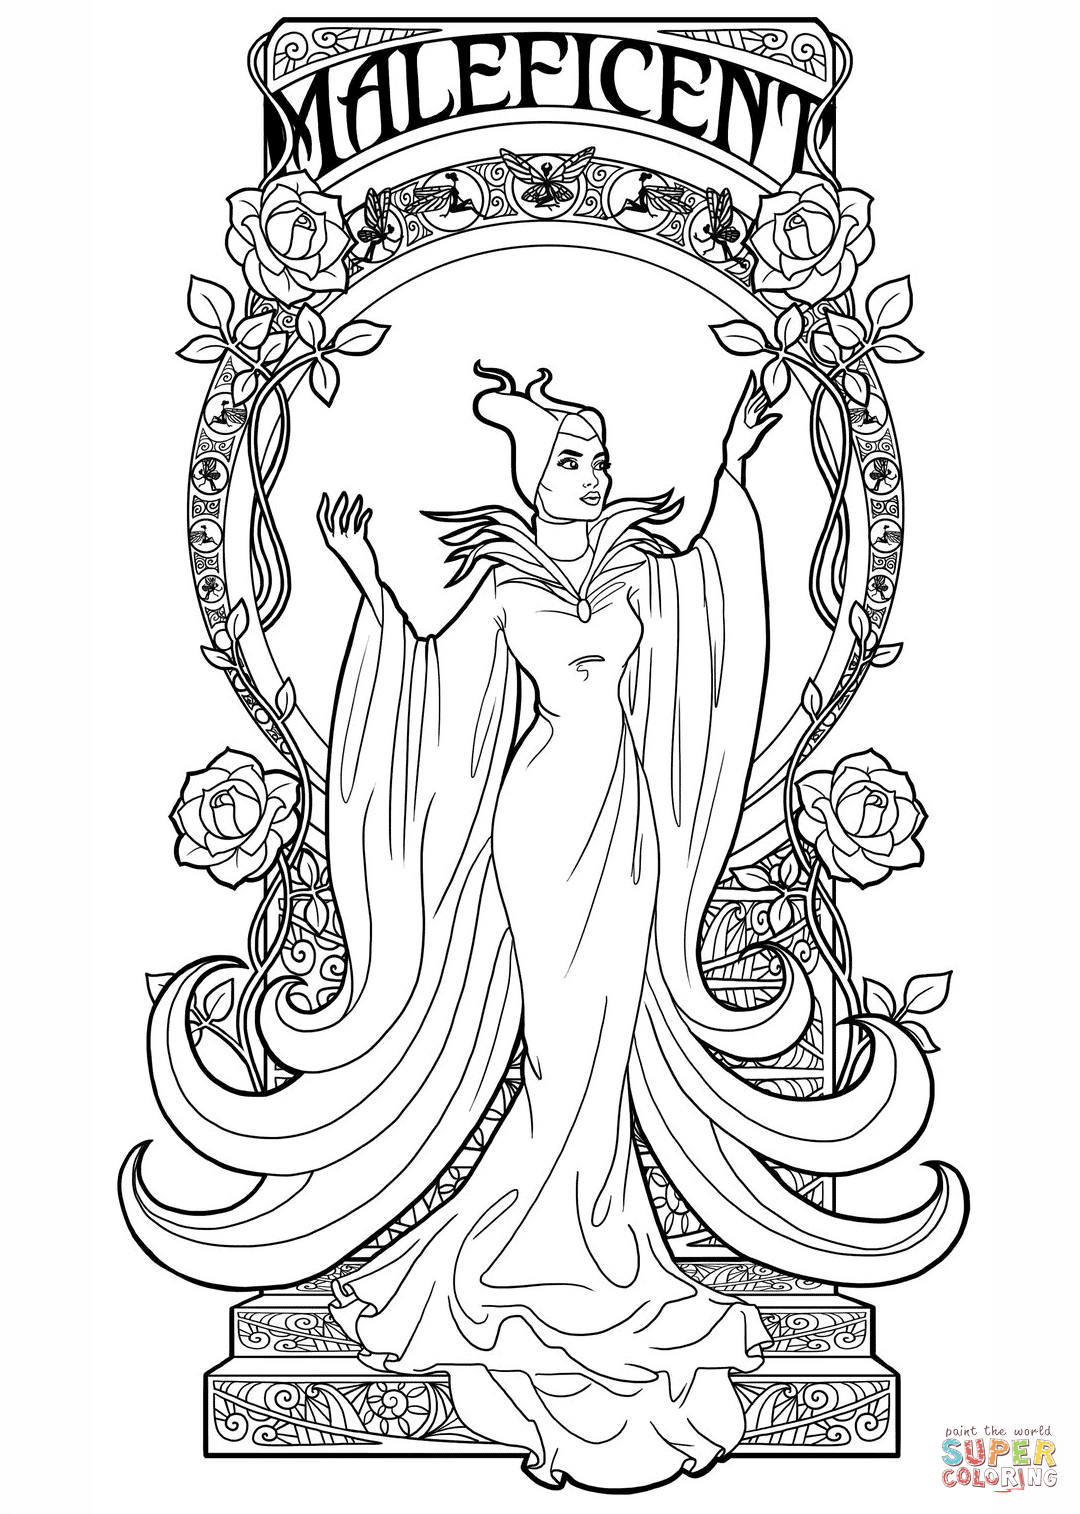 Cool Maleficent 11 Coloring Page